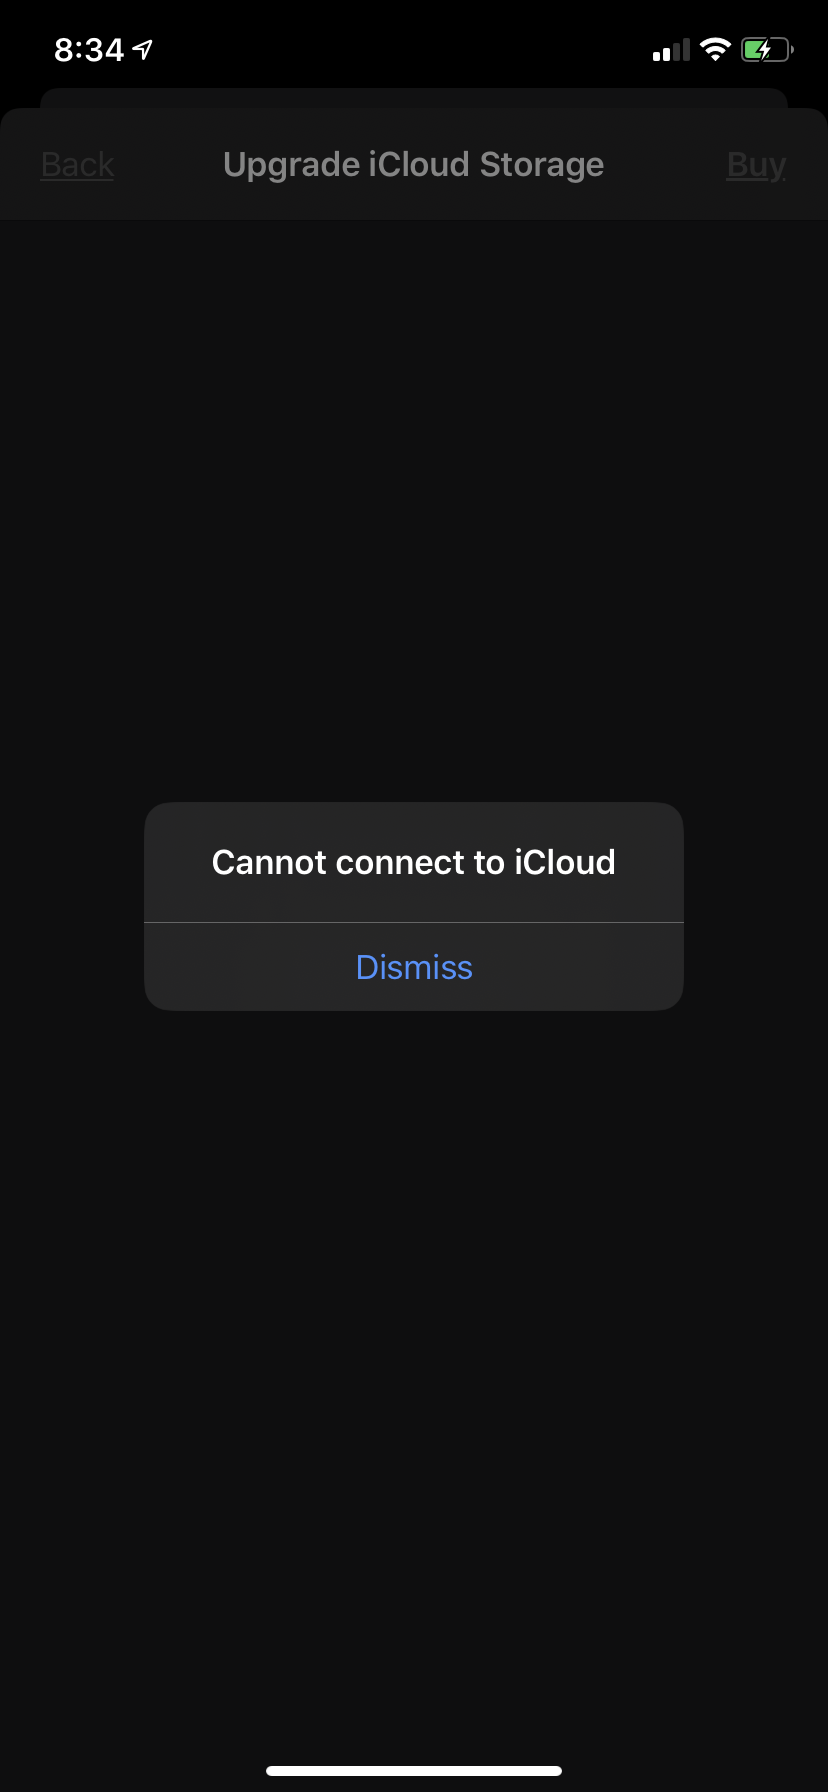 Iphone Wont Let Me Sign Out Of Icloud Can’t upgrade iCloud says cant connect to… - Apple Community